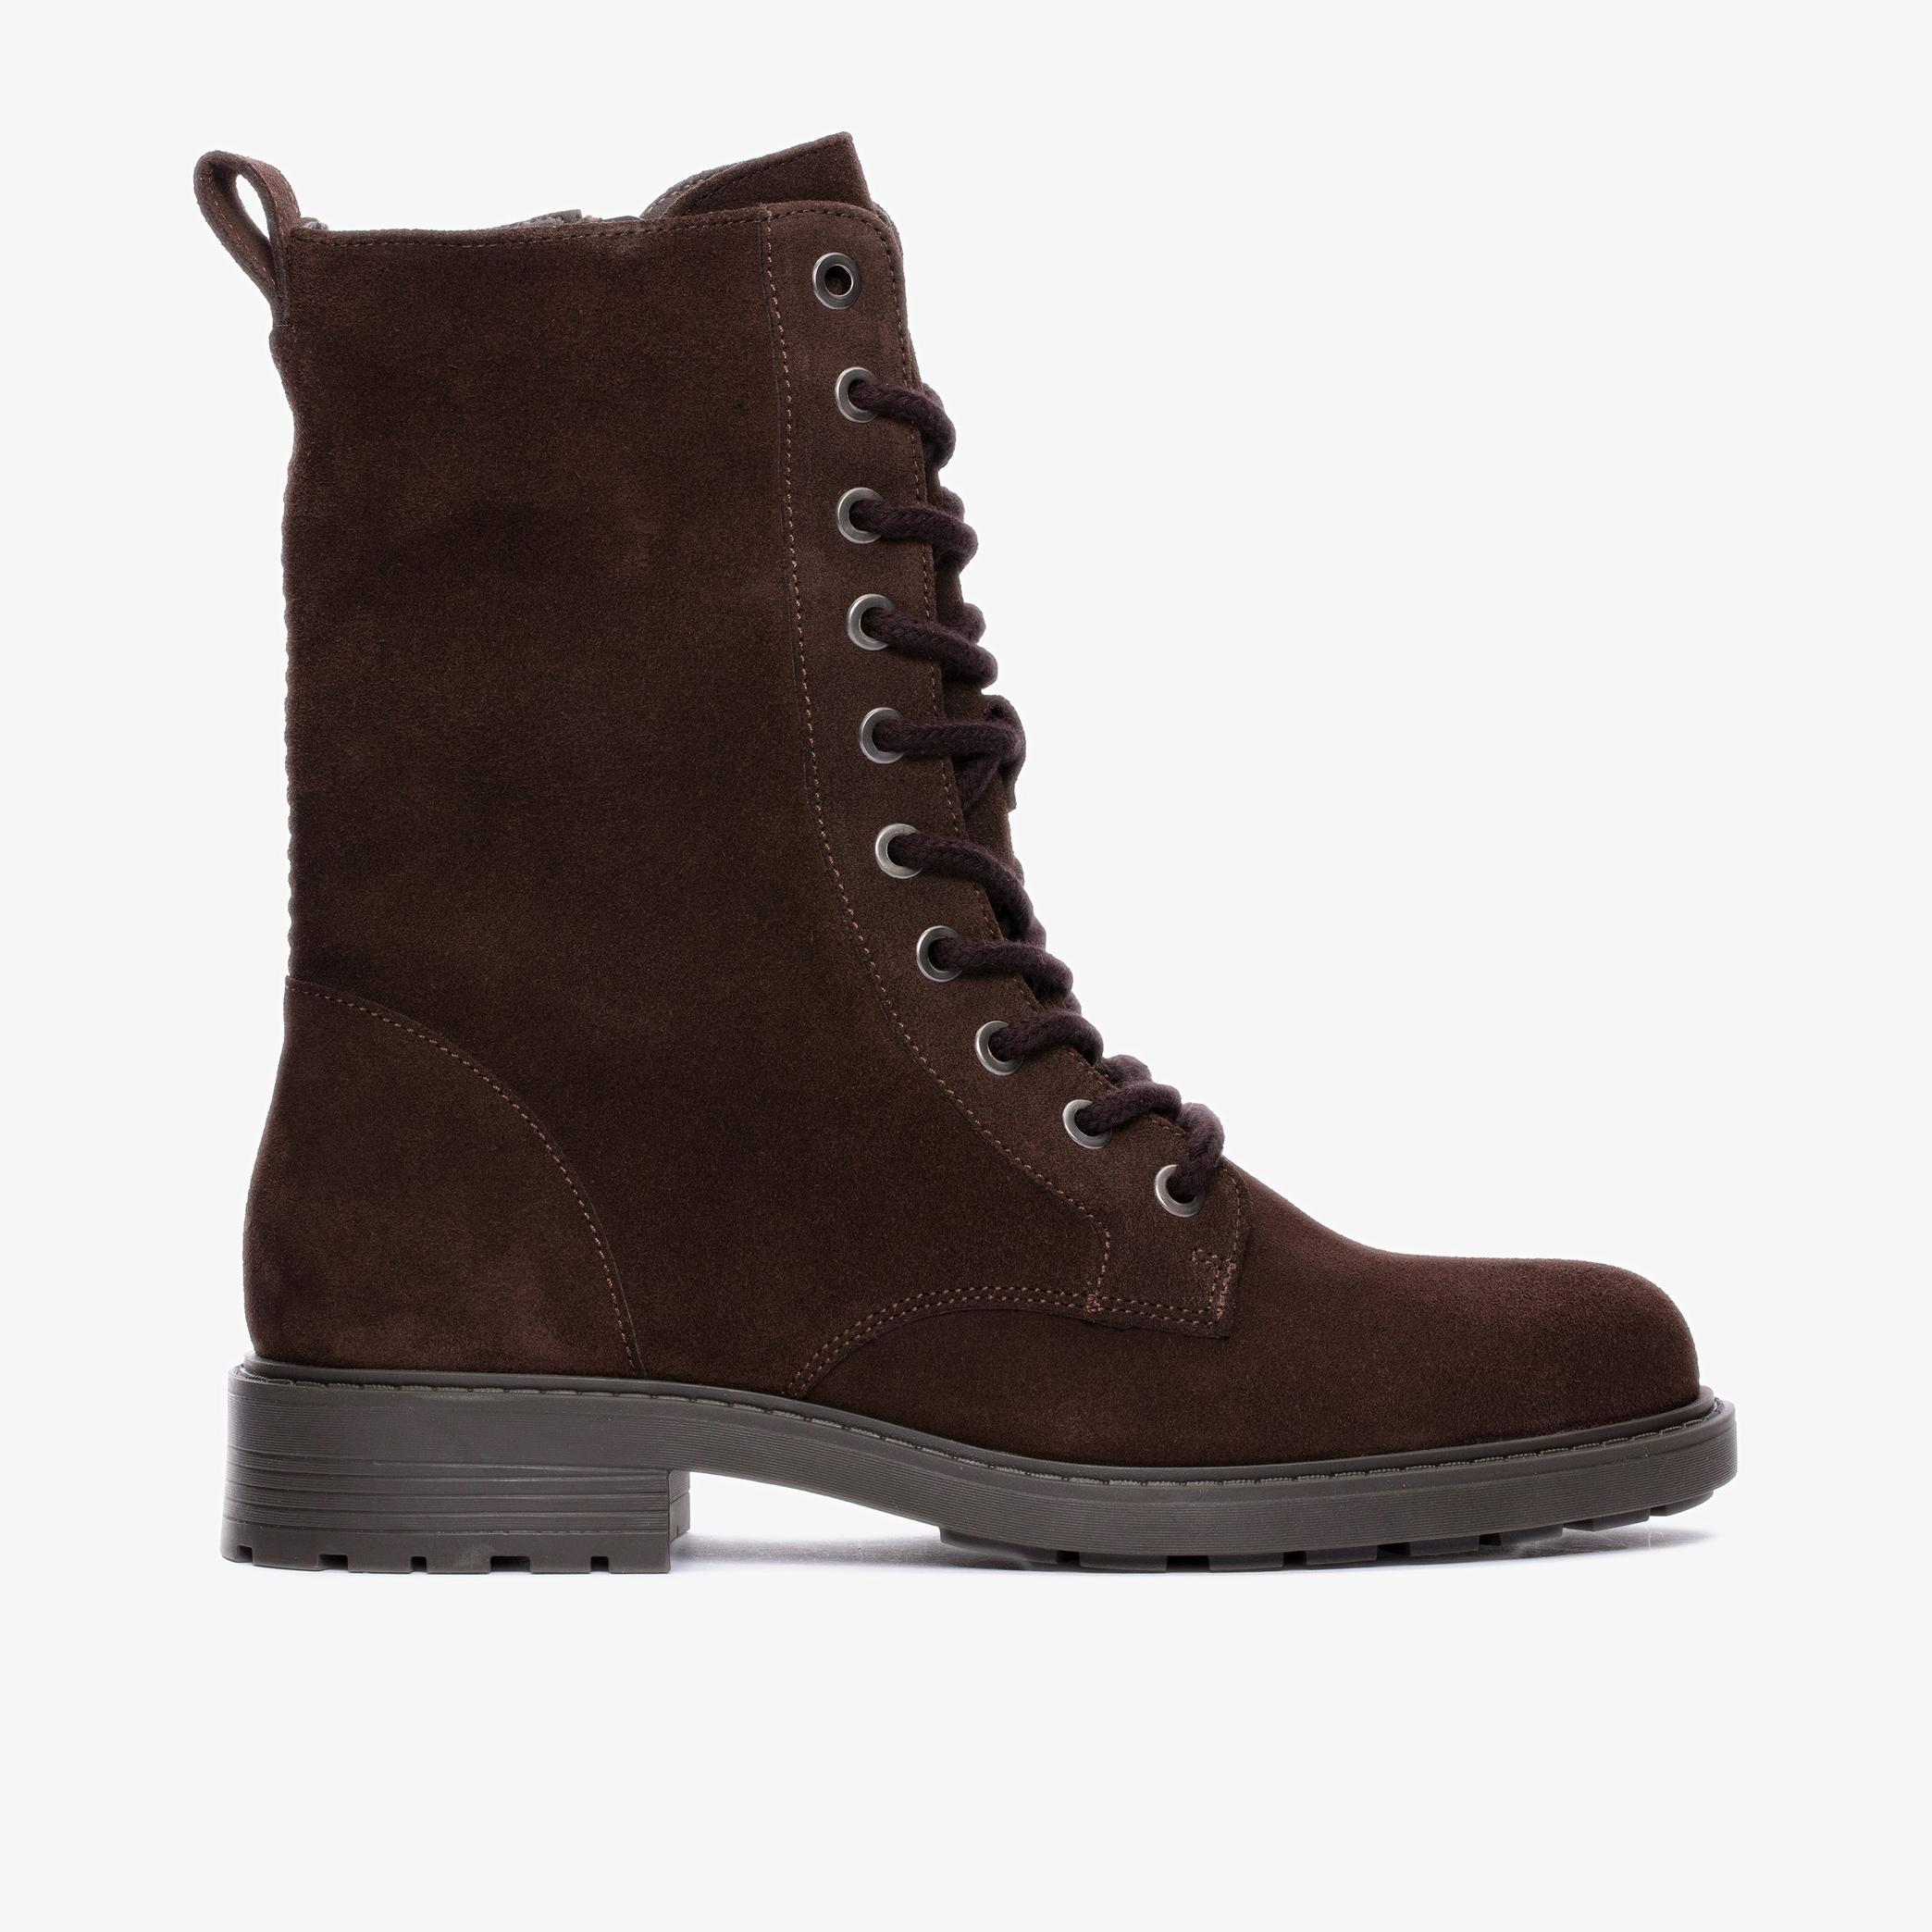 WOMENS Orinoco 2 Style Dark Brown Suede Ankle Boots | Clarks Outlet